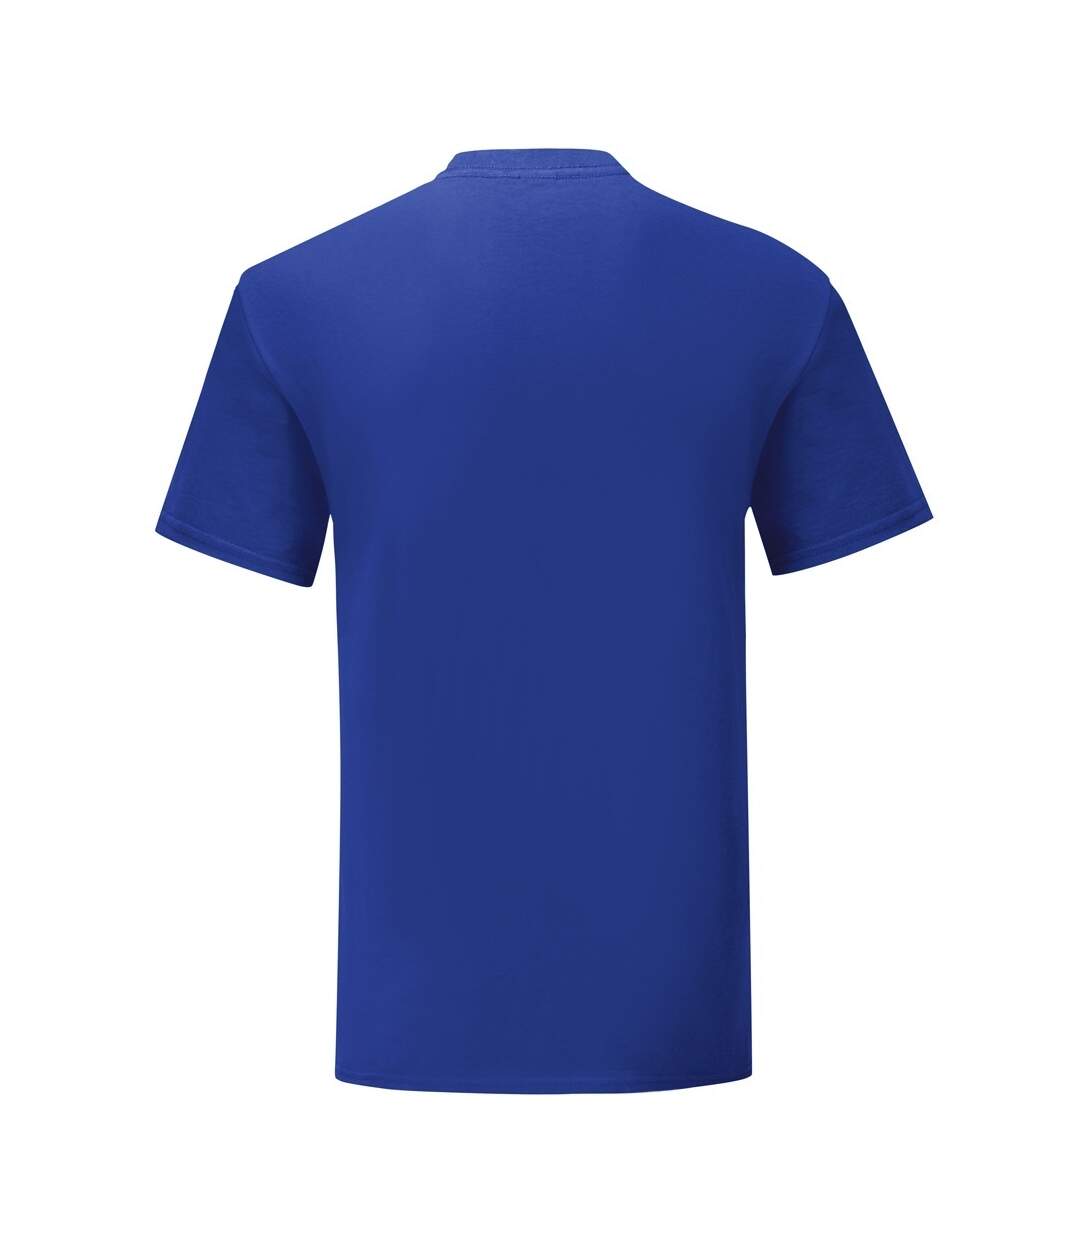 Fruit of the Loom Mens Iconic T-Shirt (Cobalt Blue)